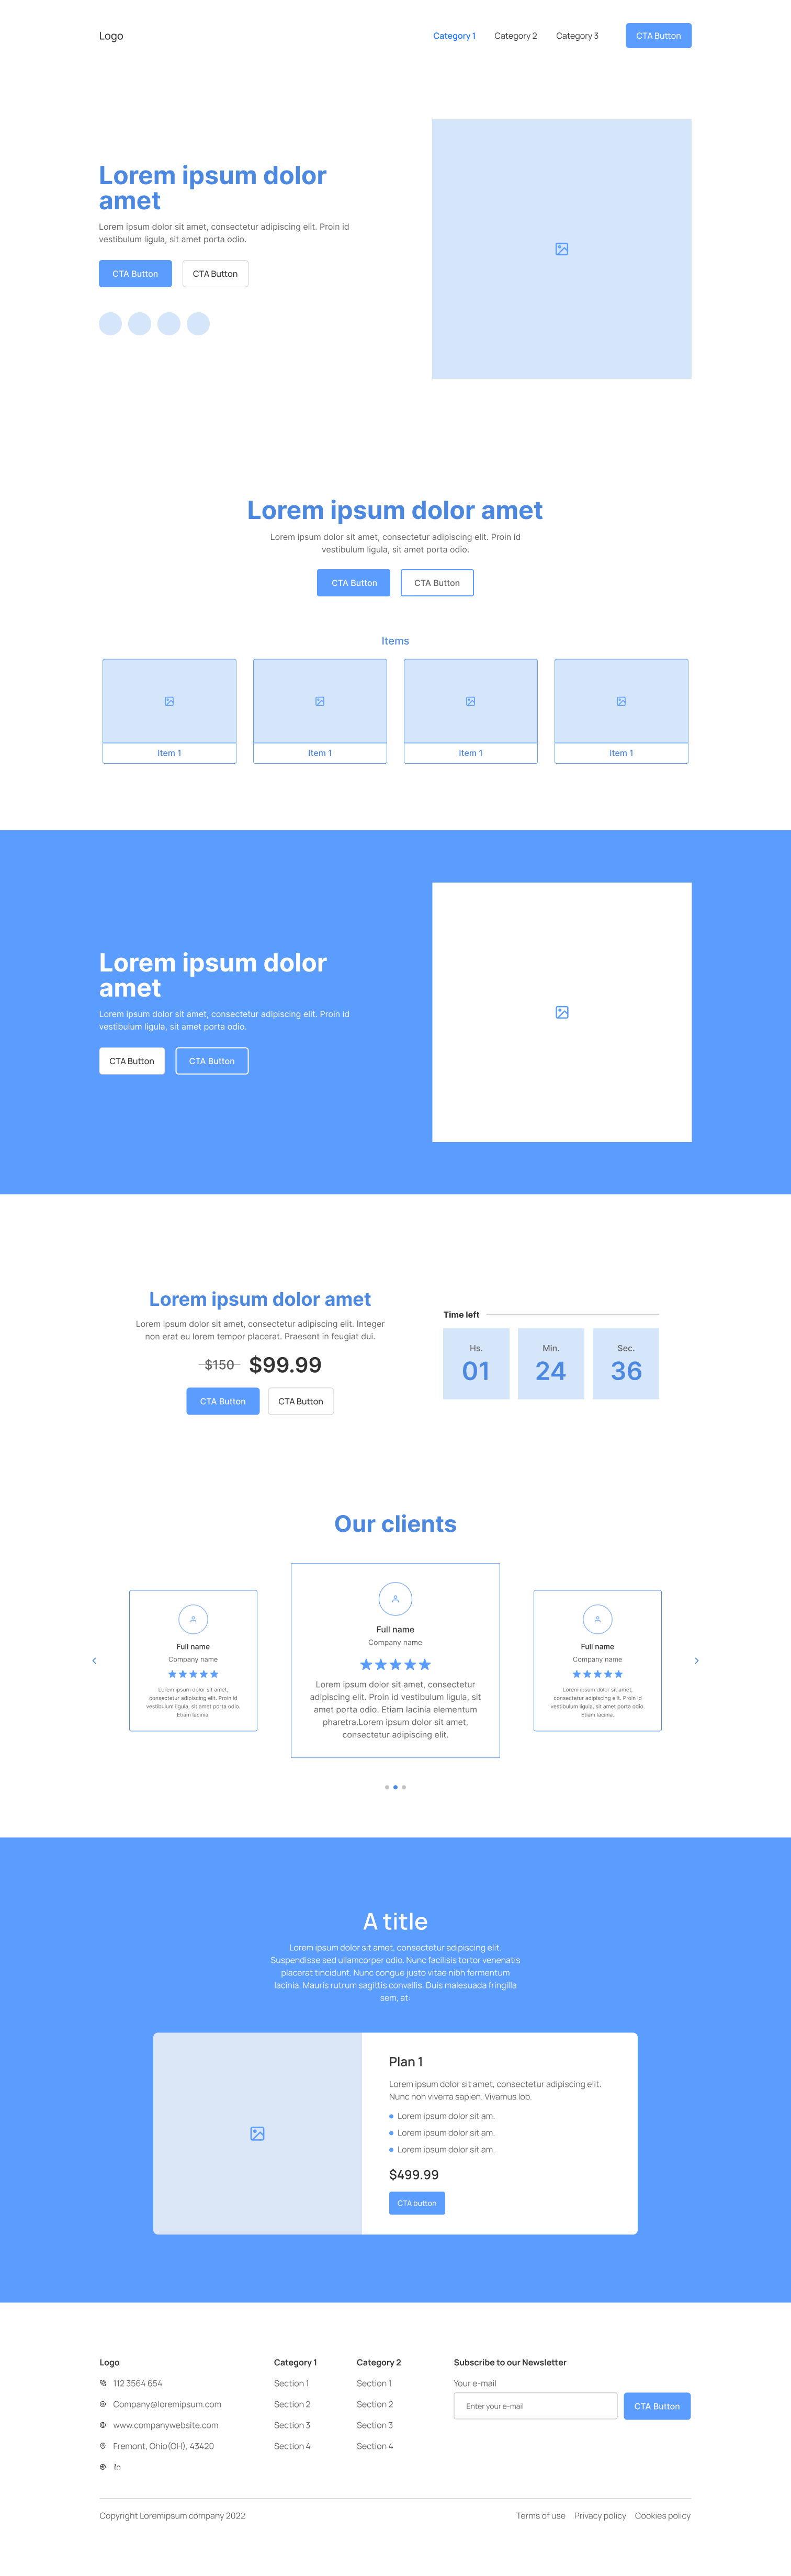 Landing page - wireframe